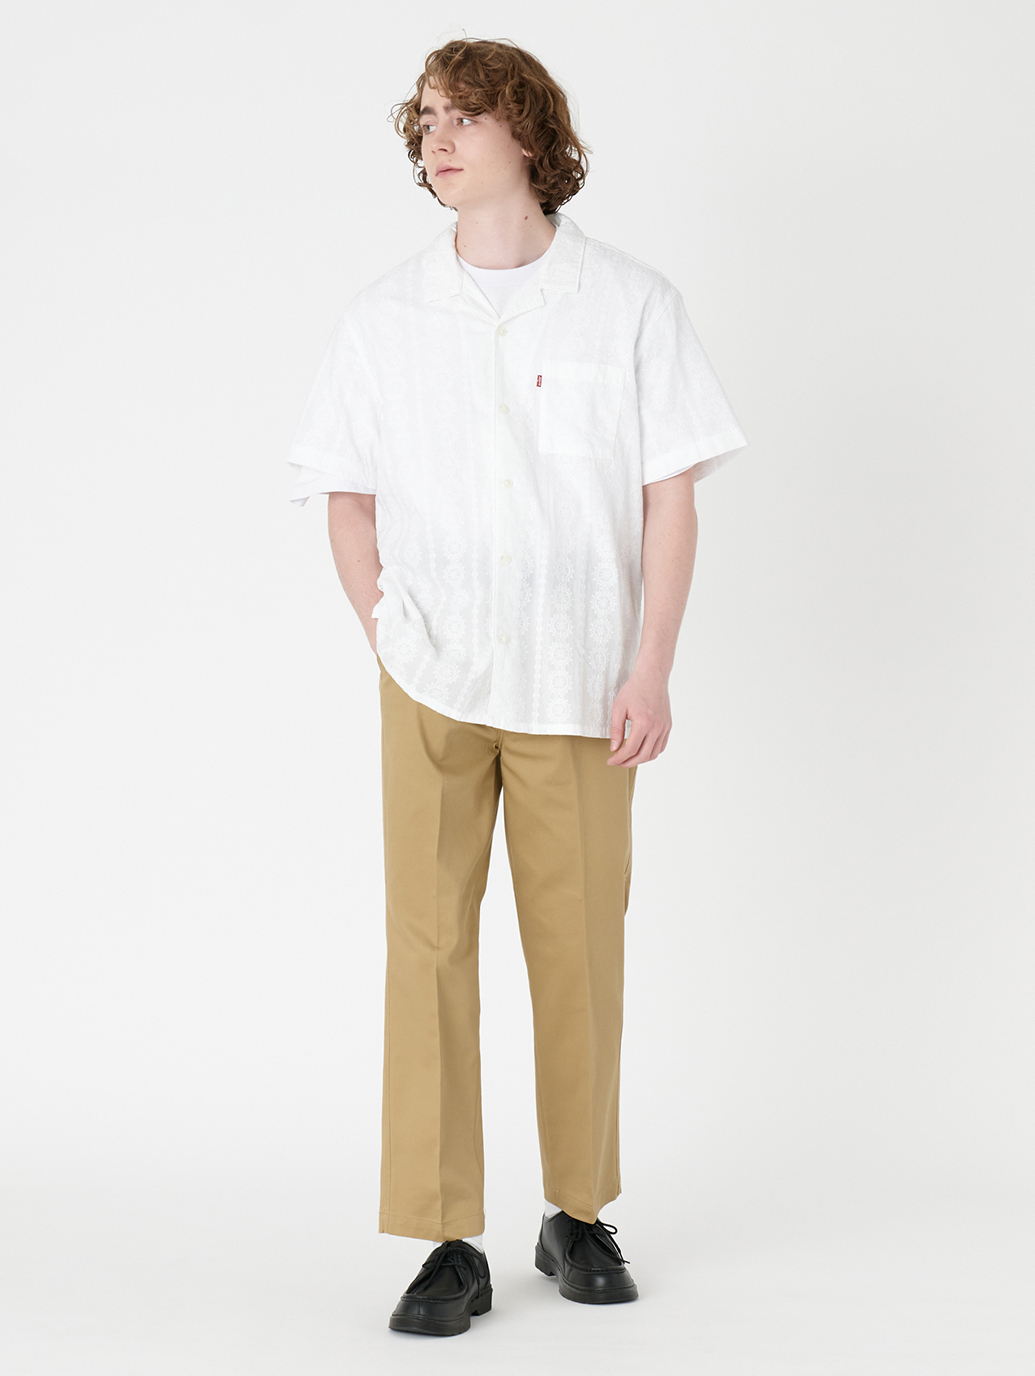 XX CHINO STRAIGHT HARVEST GOLD S CTTN/POLY TWLL